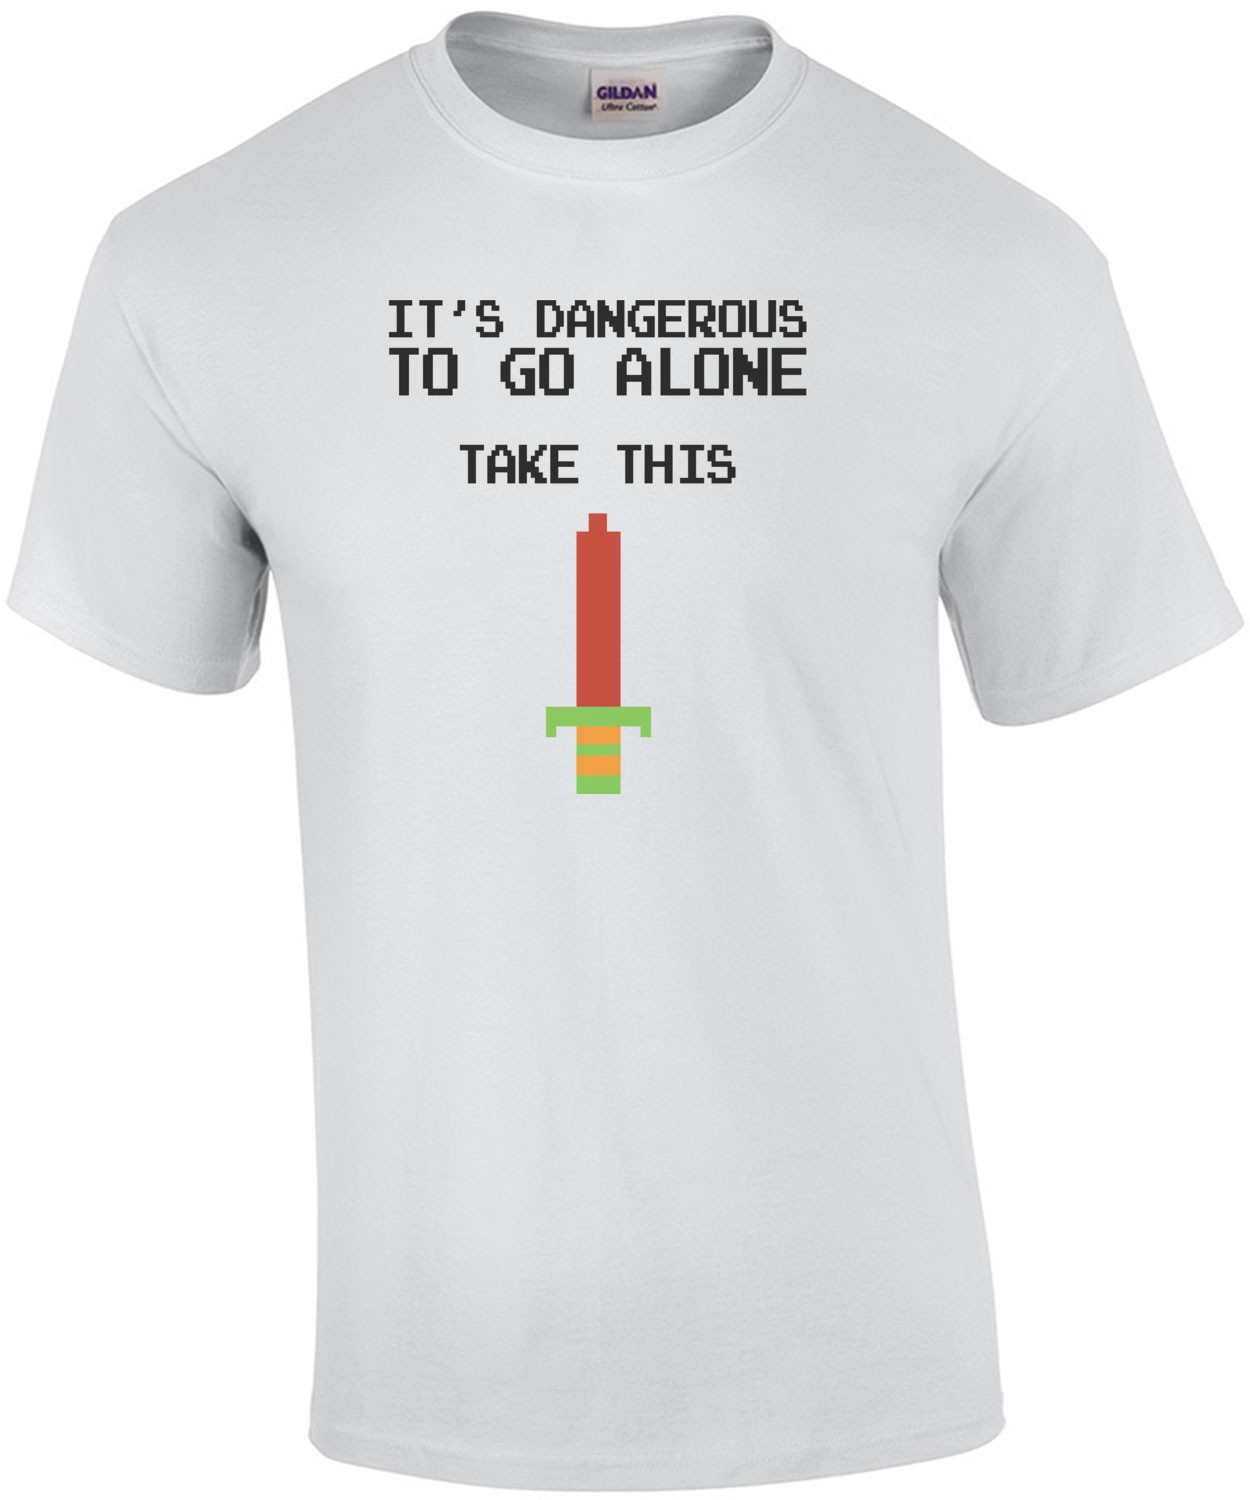 It's dangerous to go alone take this - Legend of Zelda T-Shirt